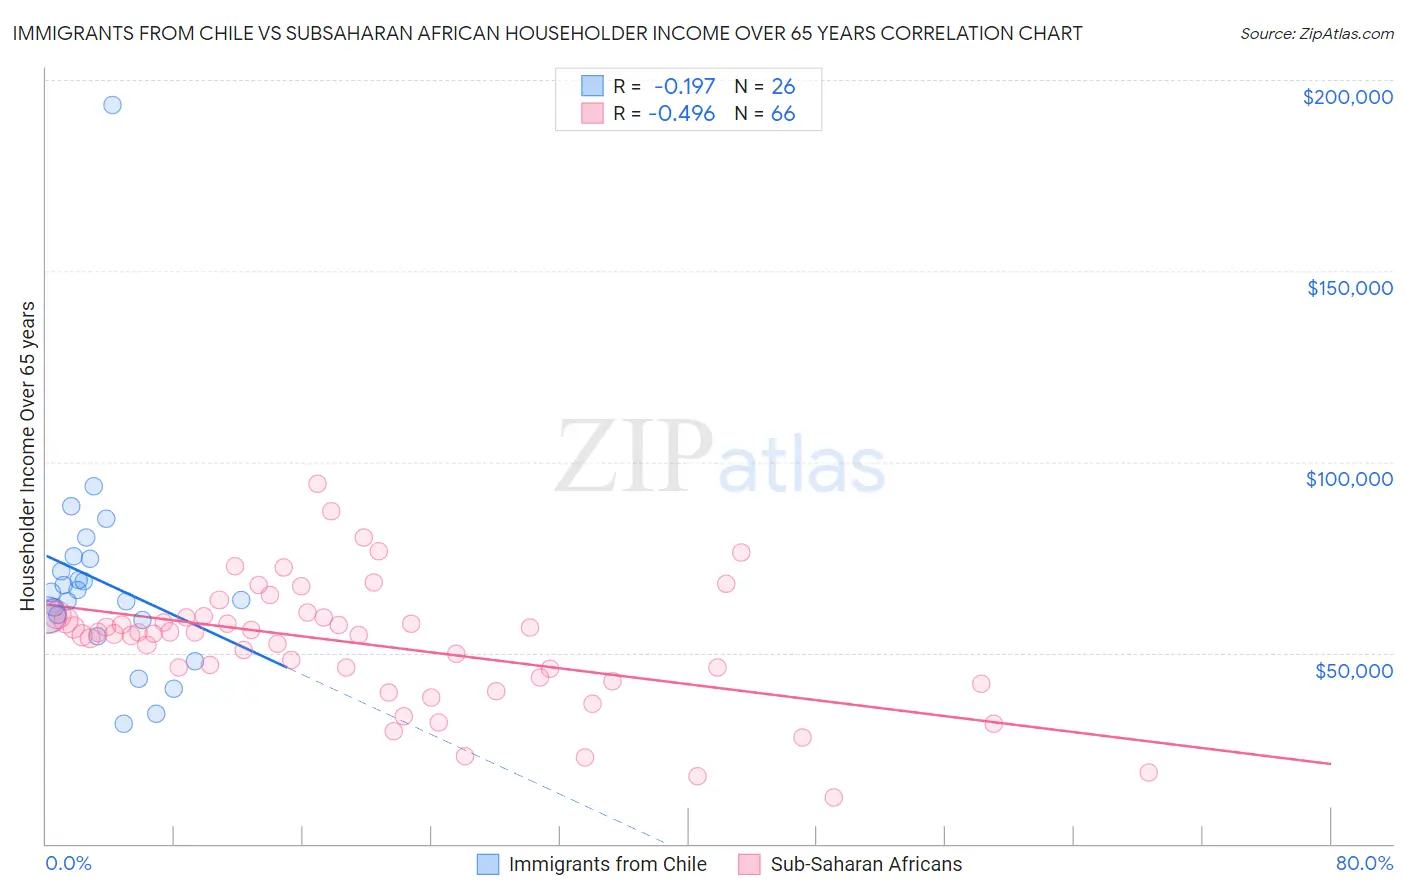 Immigrants from Chile vs Subsaharan African Householder Income Over 65 years